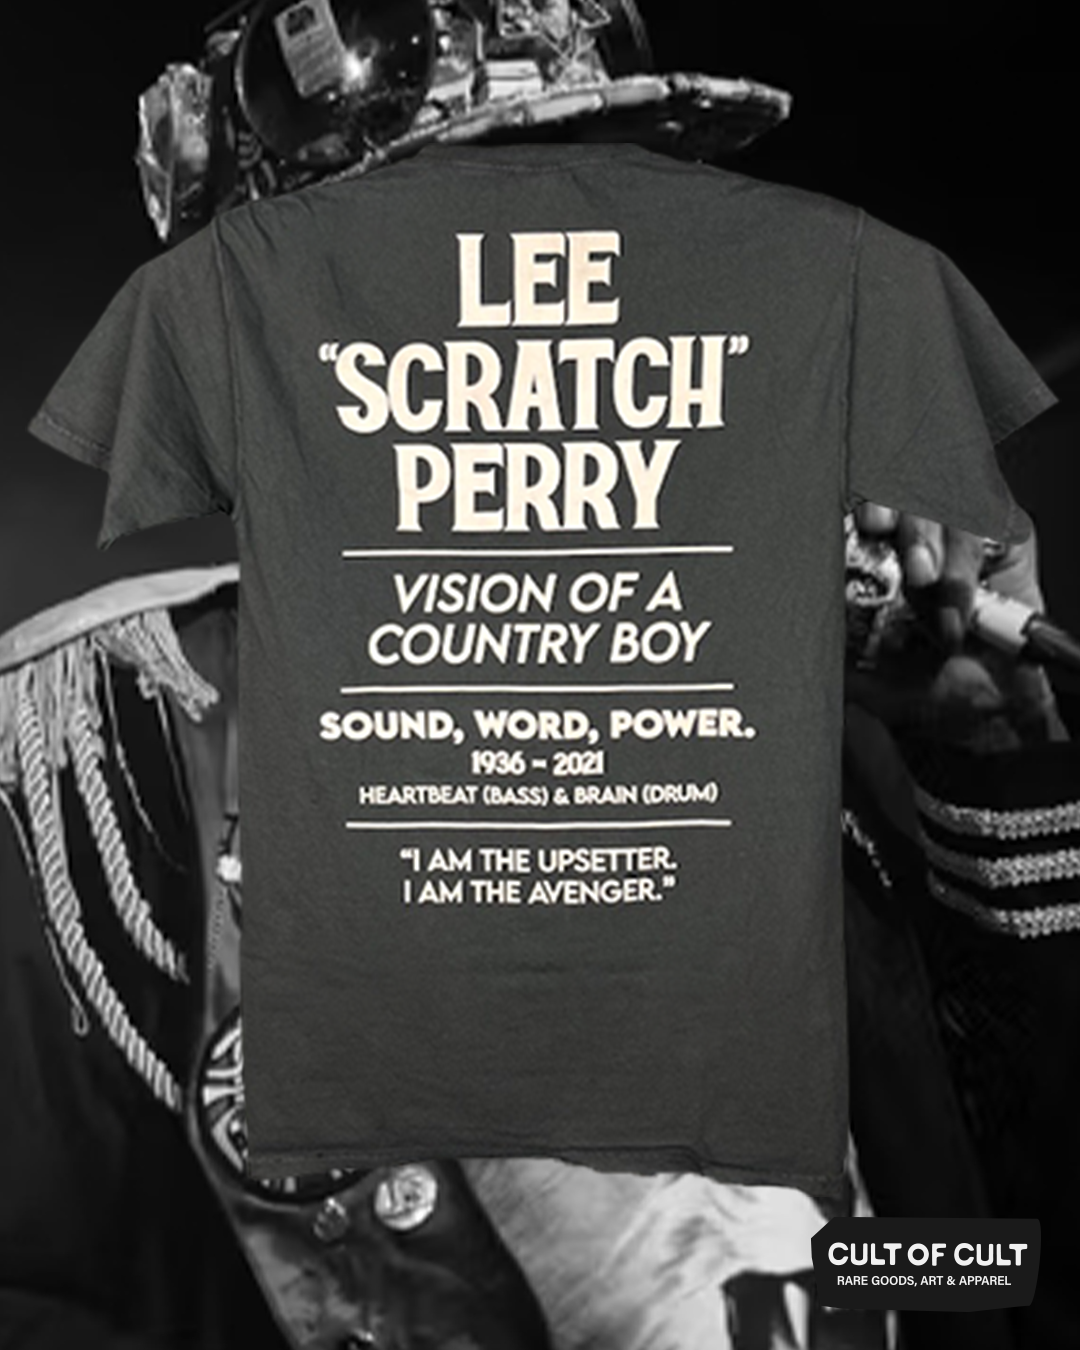 Lee "Scratch" Perry - Camiseta Sound Word Power